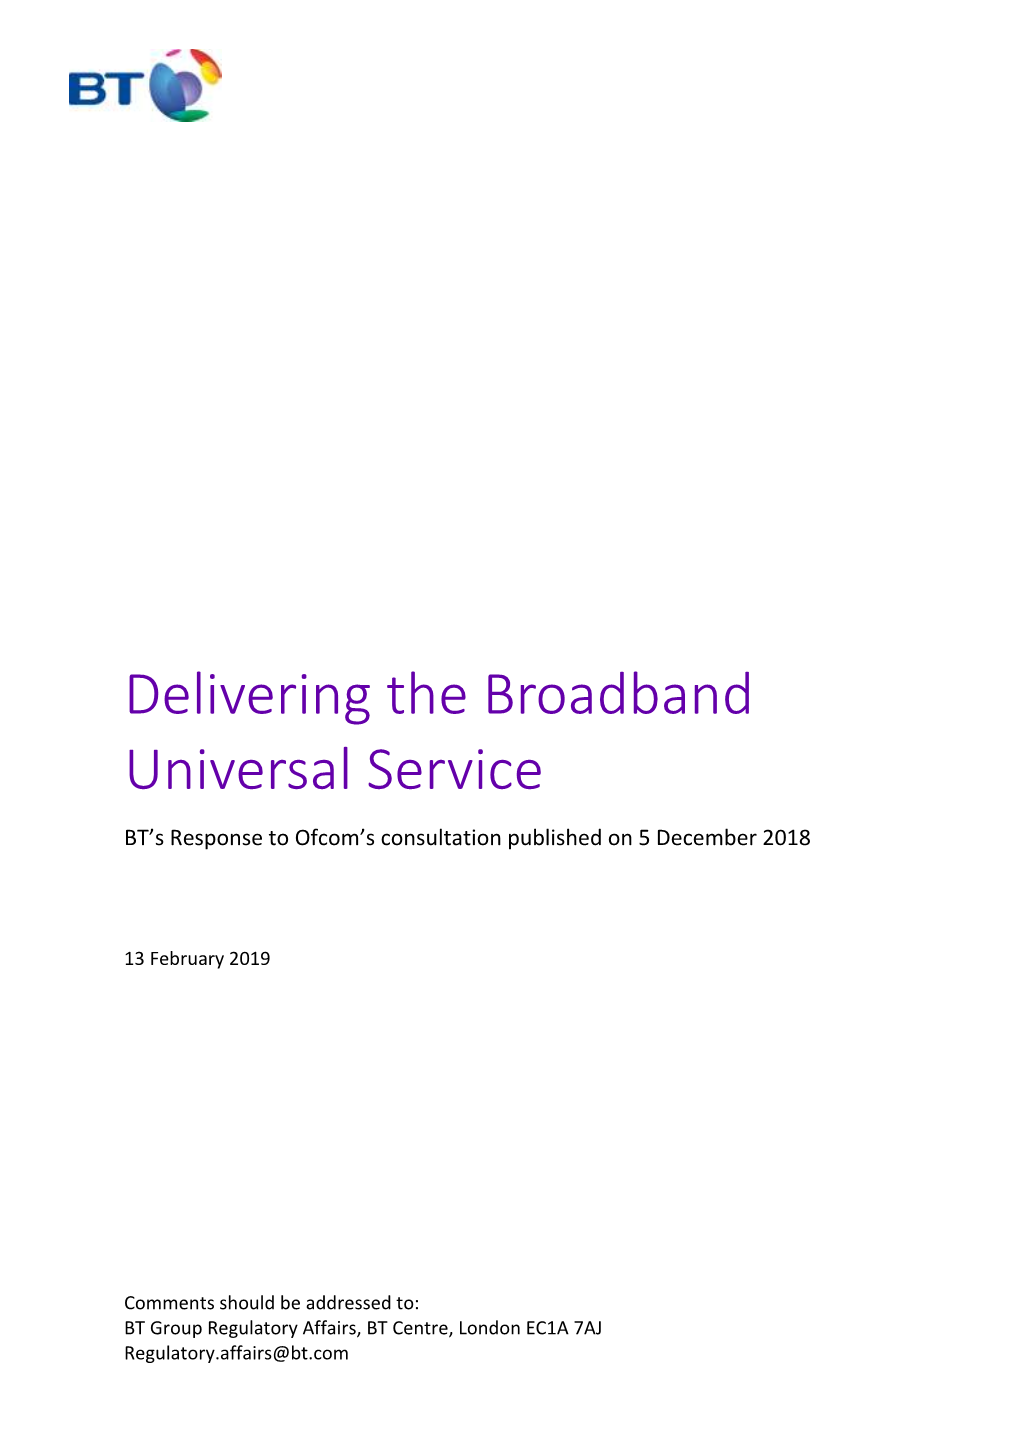 BT’S Response to Ofcom’S Consultation Published on 5 December 2018